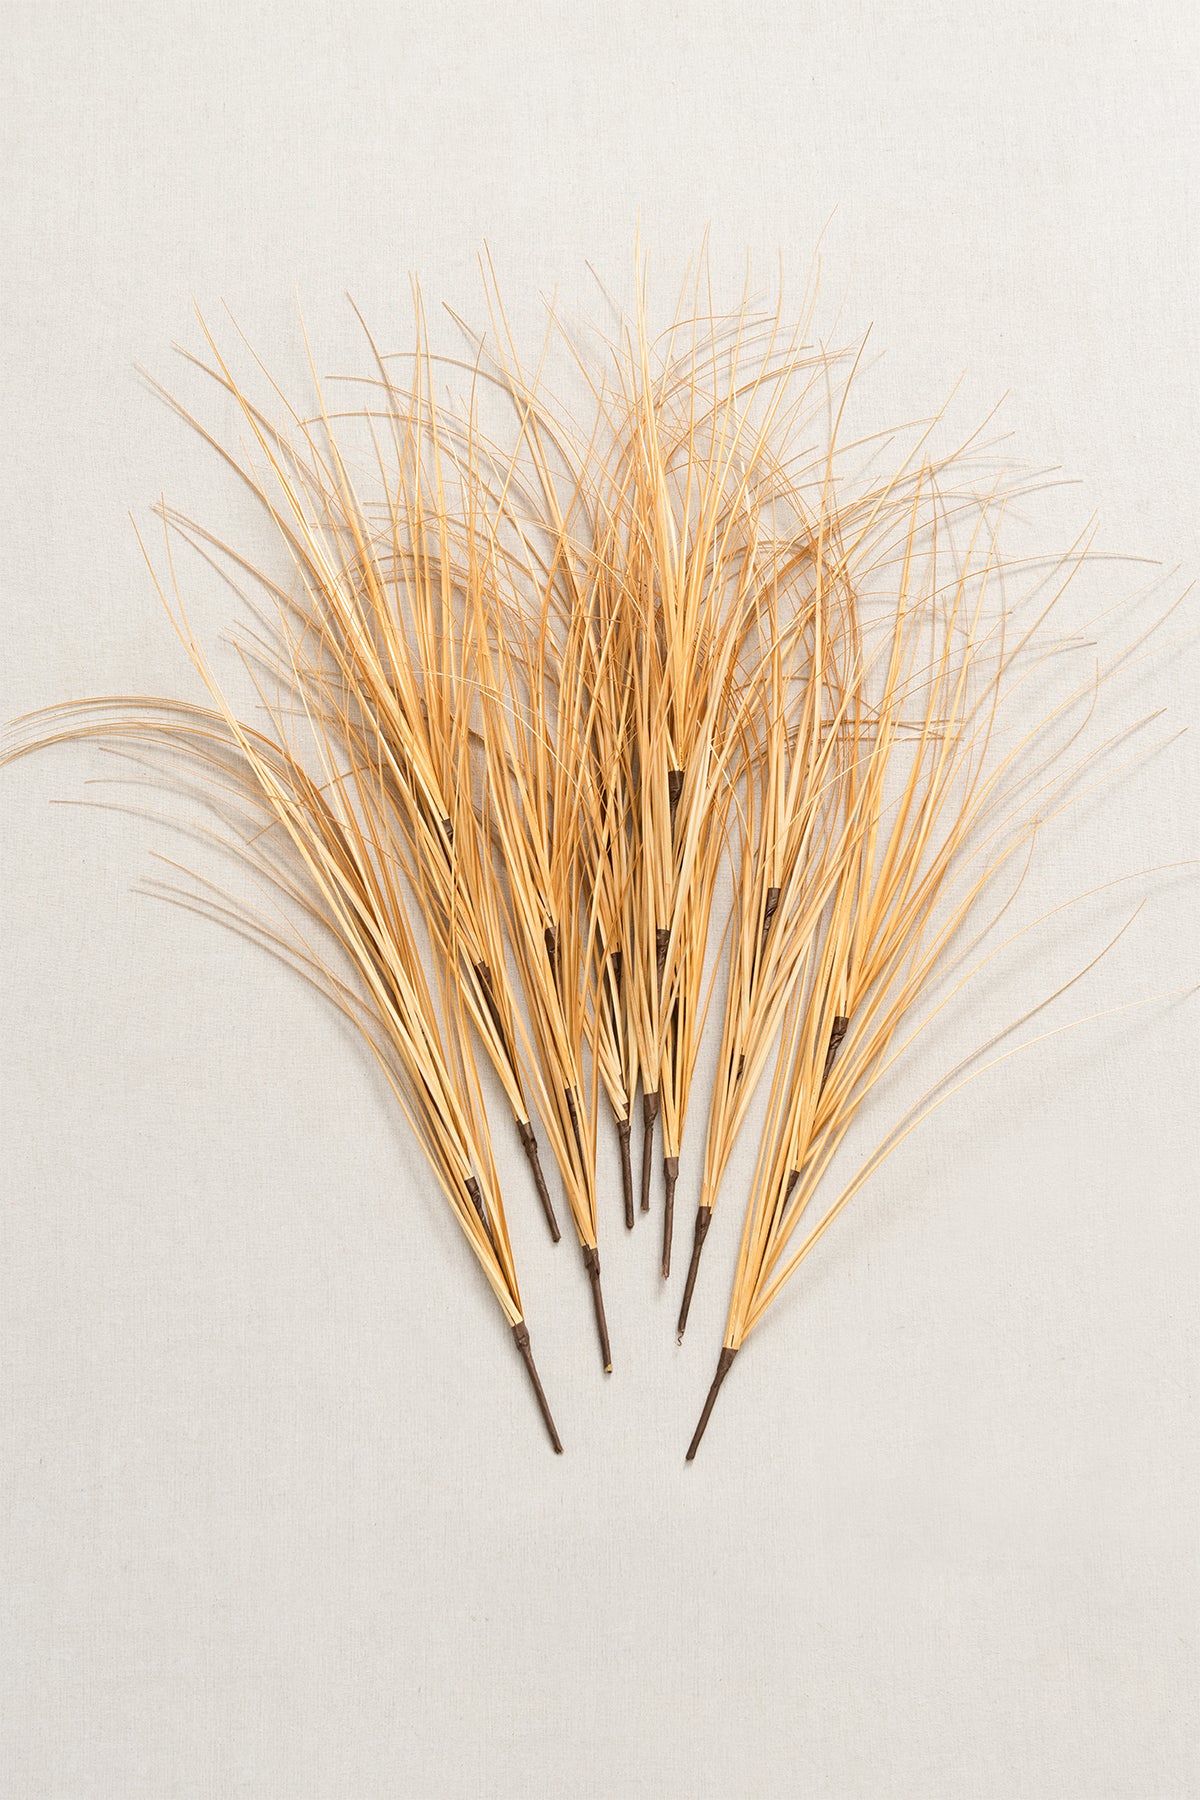 2.3ft Wheat Grass Branches - 3 Colors